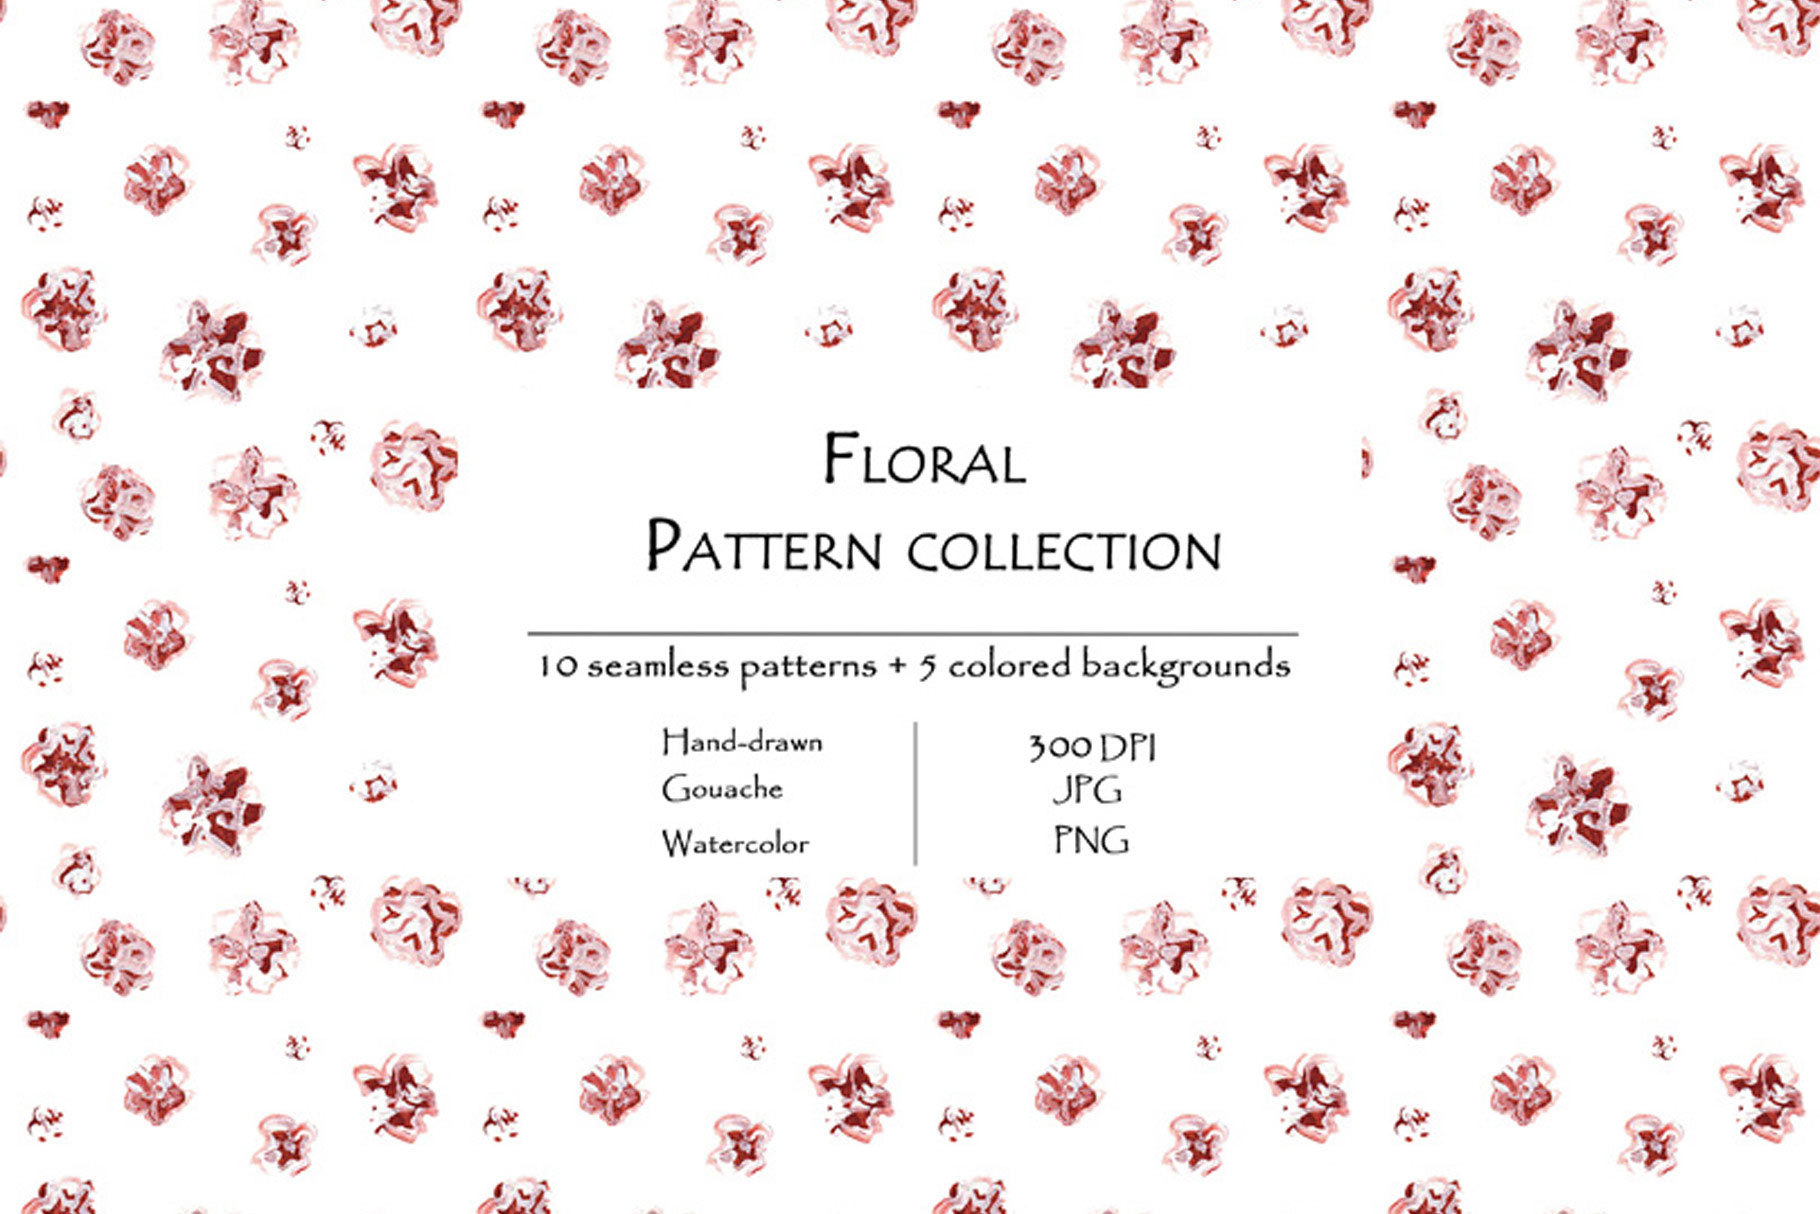 Floral Pattern Collection Of 10 Seamless Patterns And 5 Colored Backgrounds Pink Style.